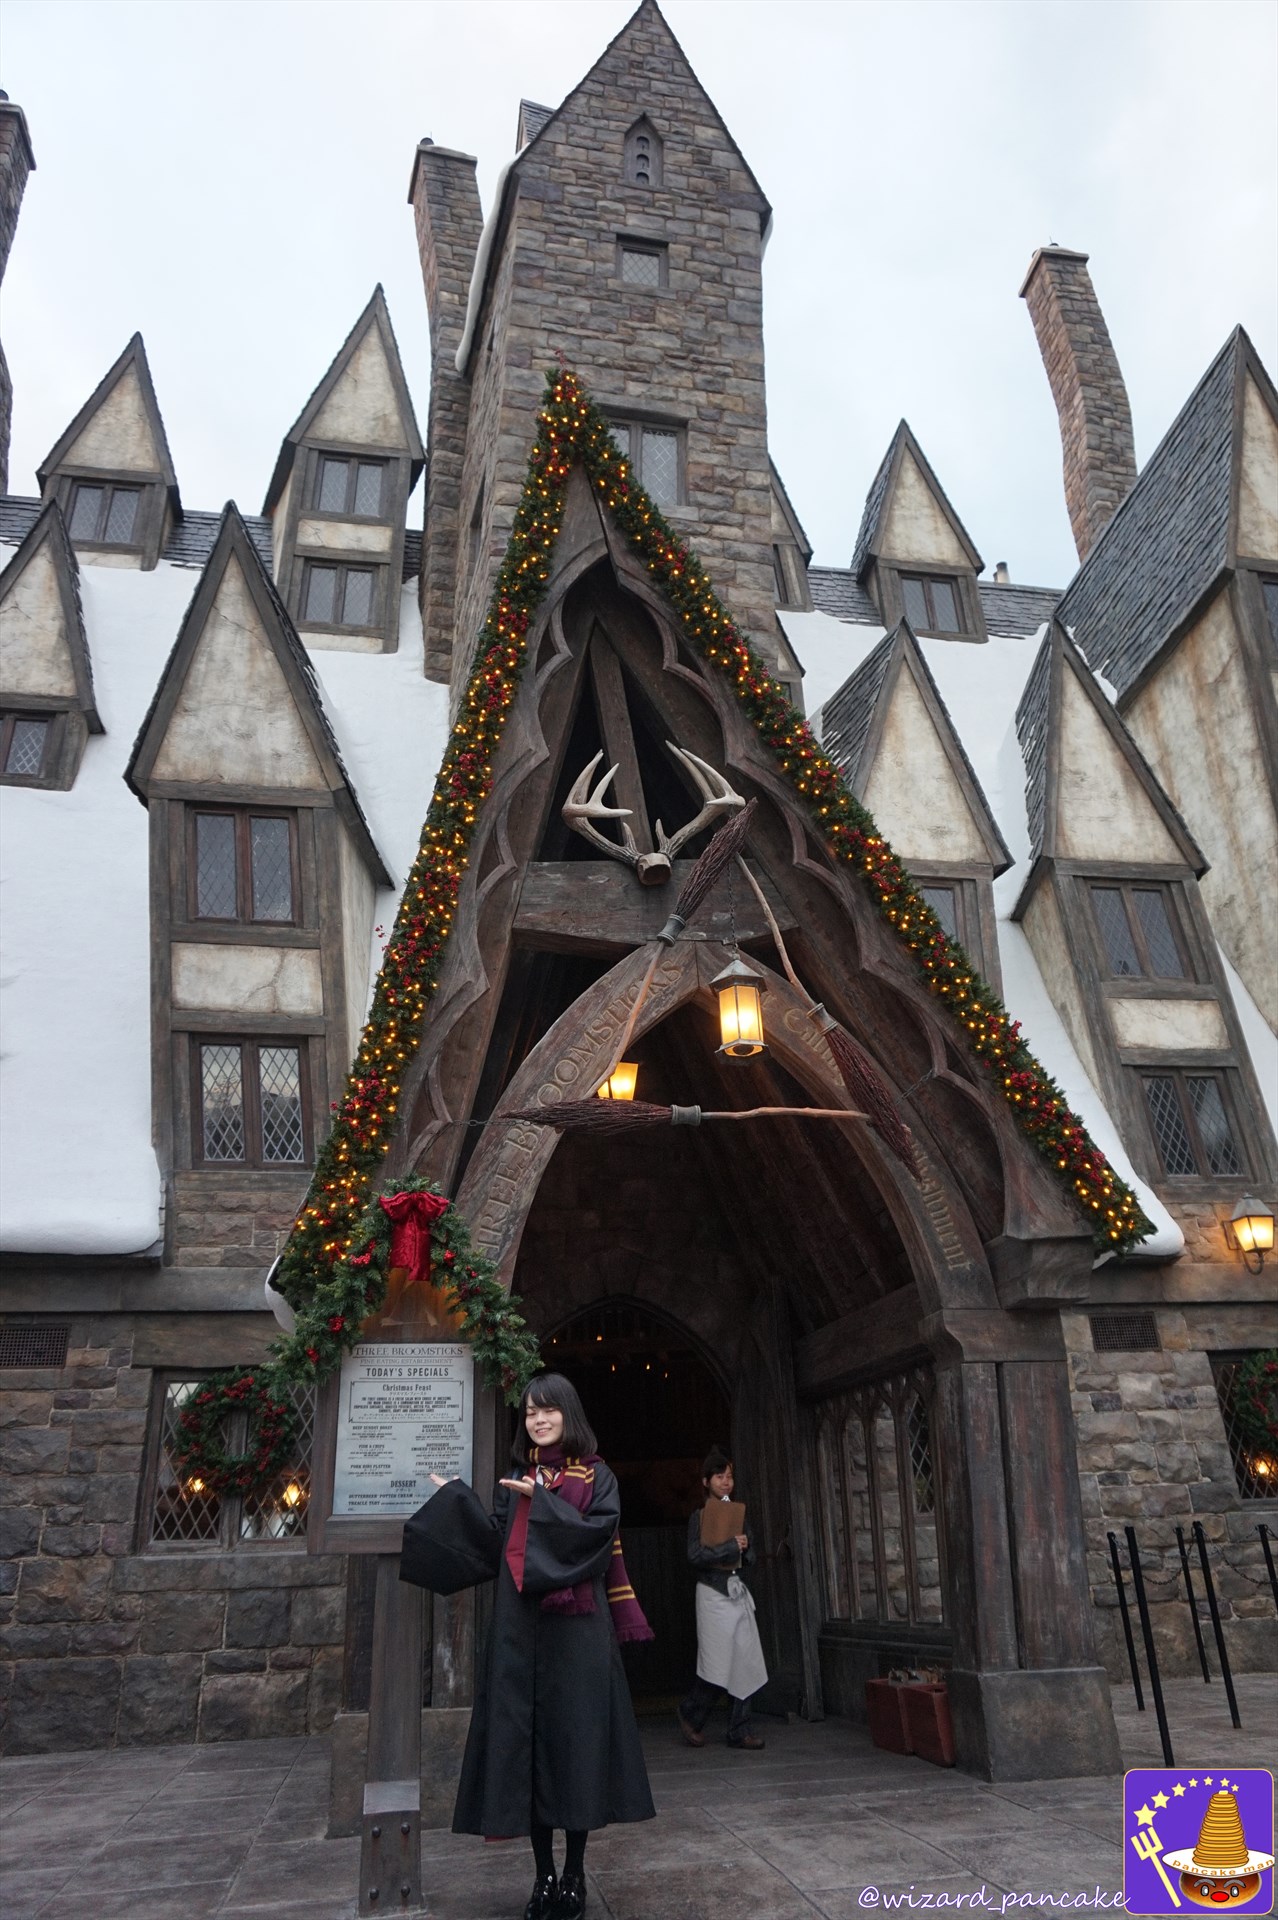 Picture of the entrance to the Three Broomsticks (restaurant) USJ Harry Potter area